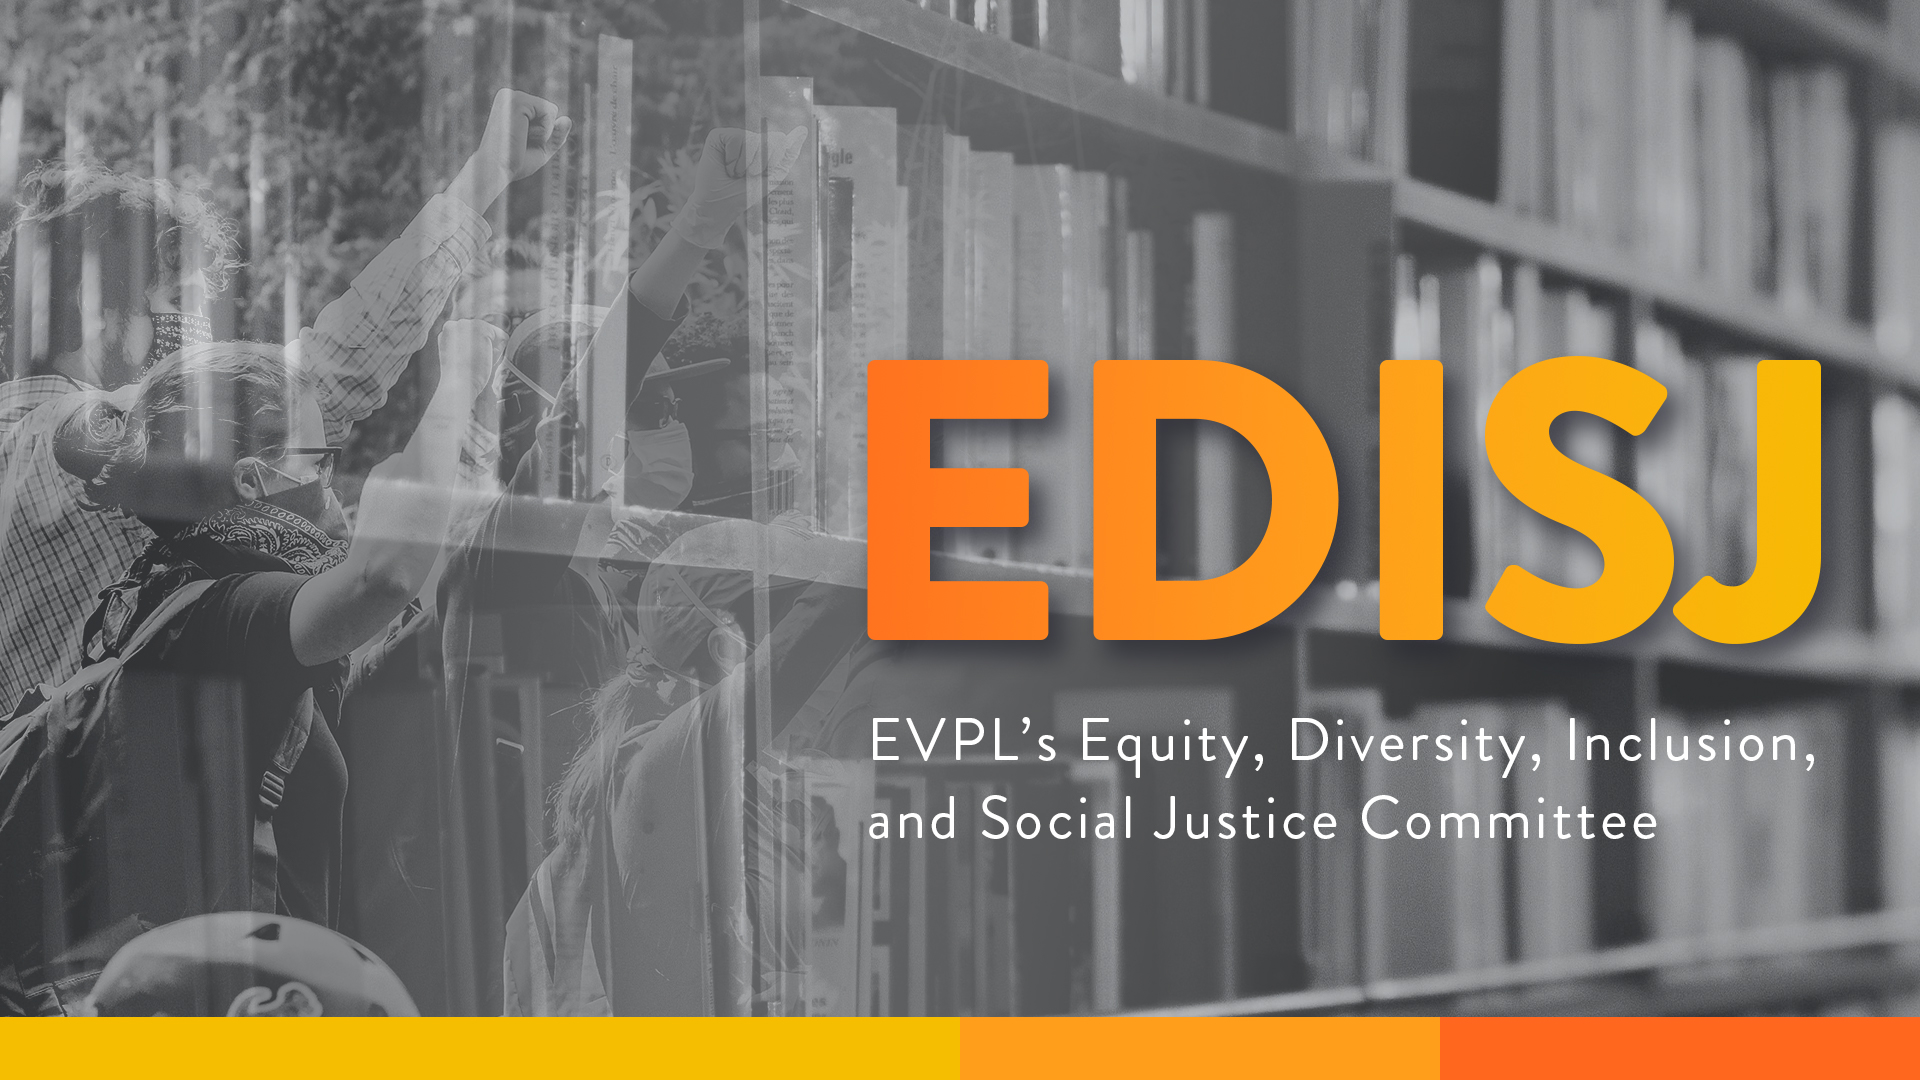 Equity, Diversity, Inclusion, and Social Justice Team at EVPL